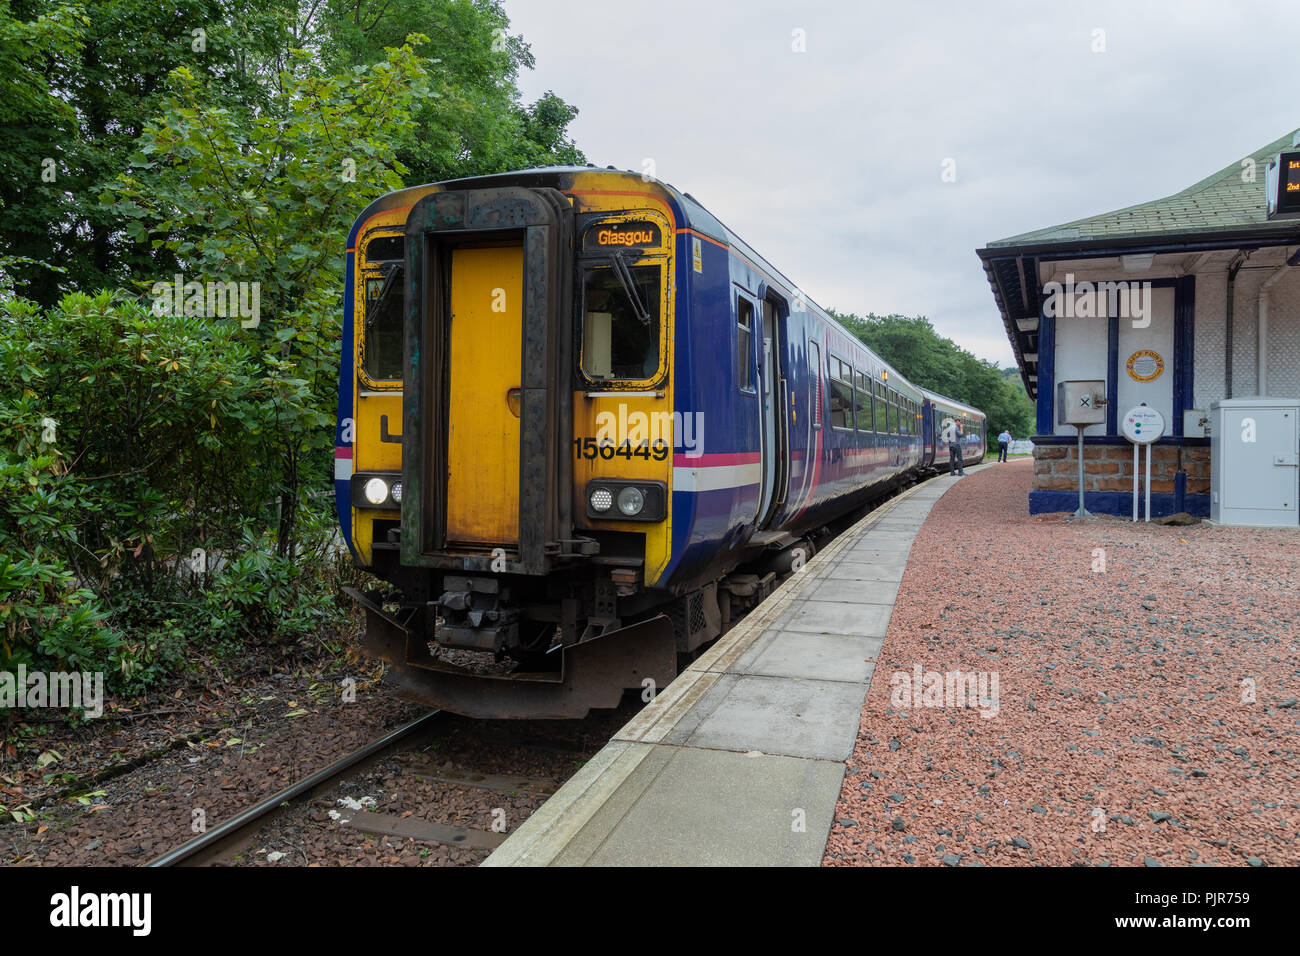 A Scotrail Class 156 Diesel Multiple Unit train at Garelochhead train station in Argyll and Bute, Scotland Stock Photo